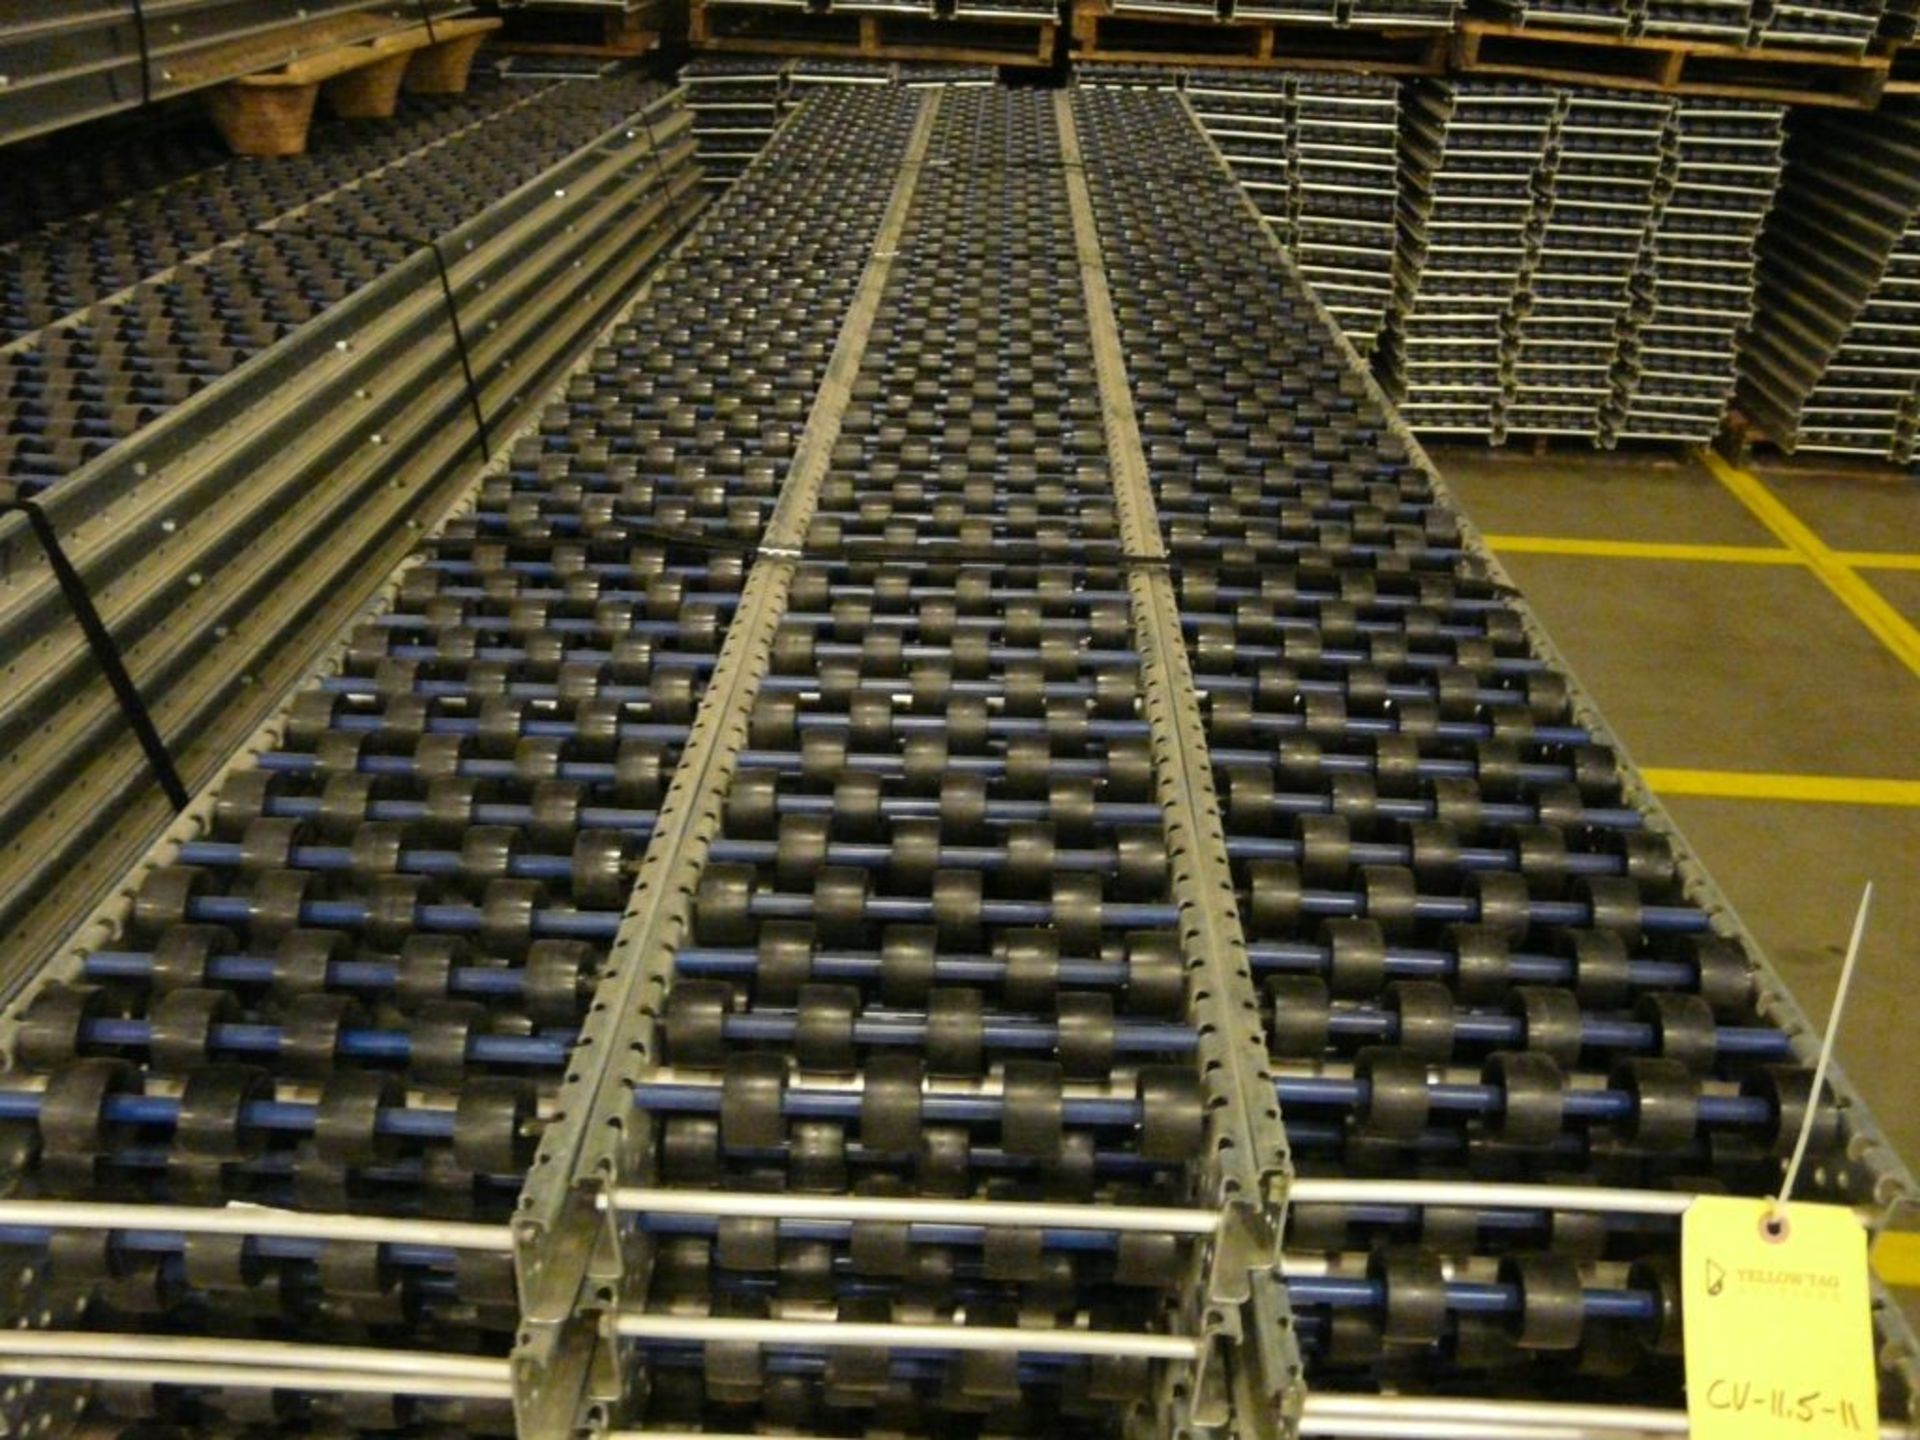 Lot of (90) SpanTrack Wheelbed Carton Flow Conveyors - 11.5'L x 11"W; Tag: 223577 - $30 Lot - Image 3 of 4